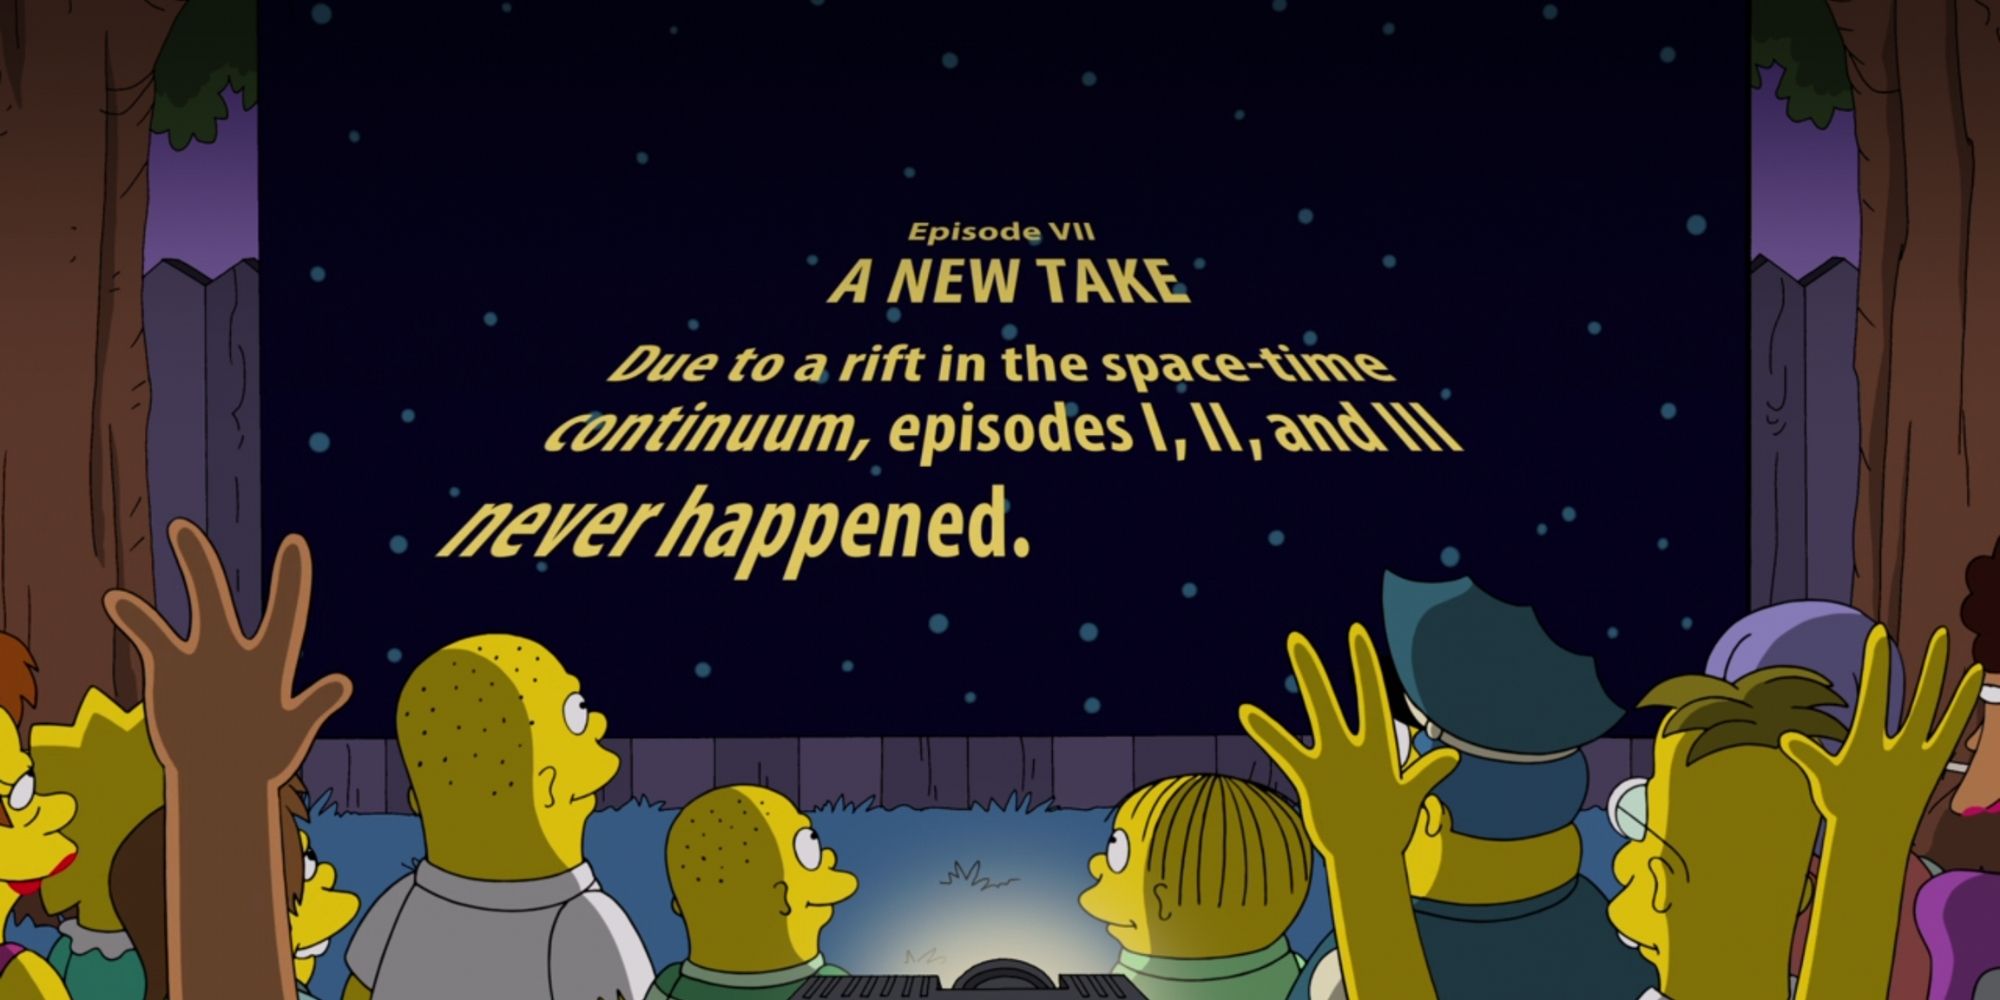 The Simpsons’ Star Wars Prequel Trilogy Response Was Surprisingly Brutal